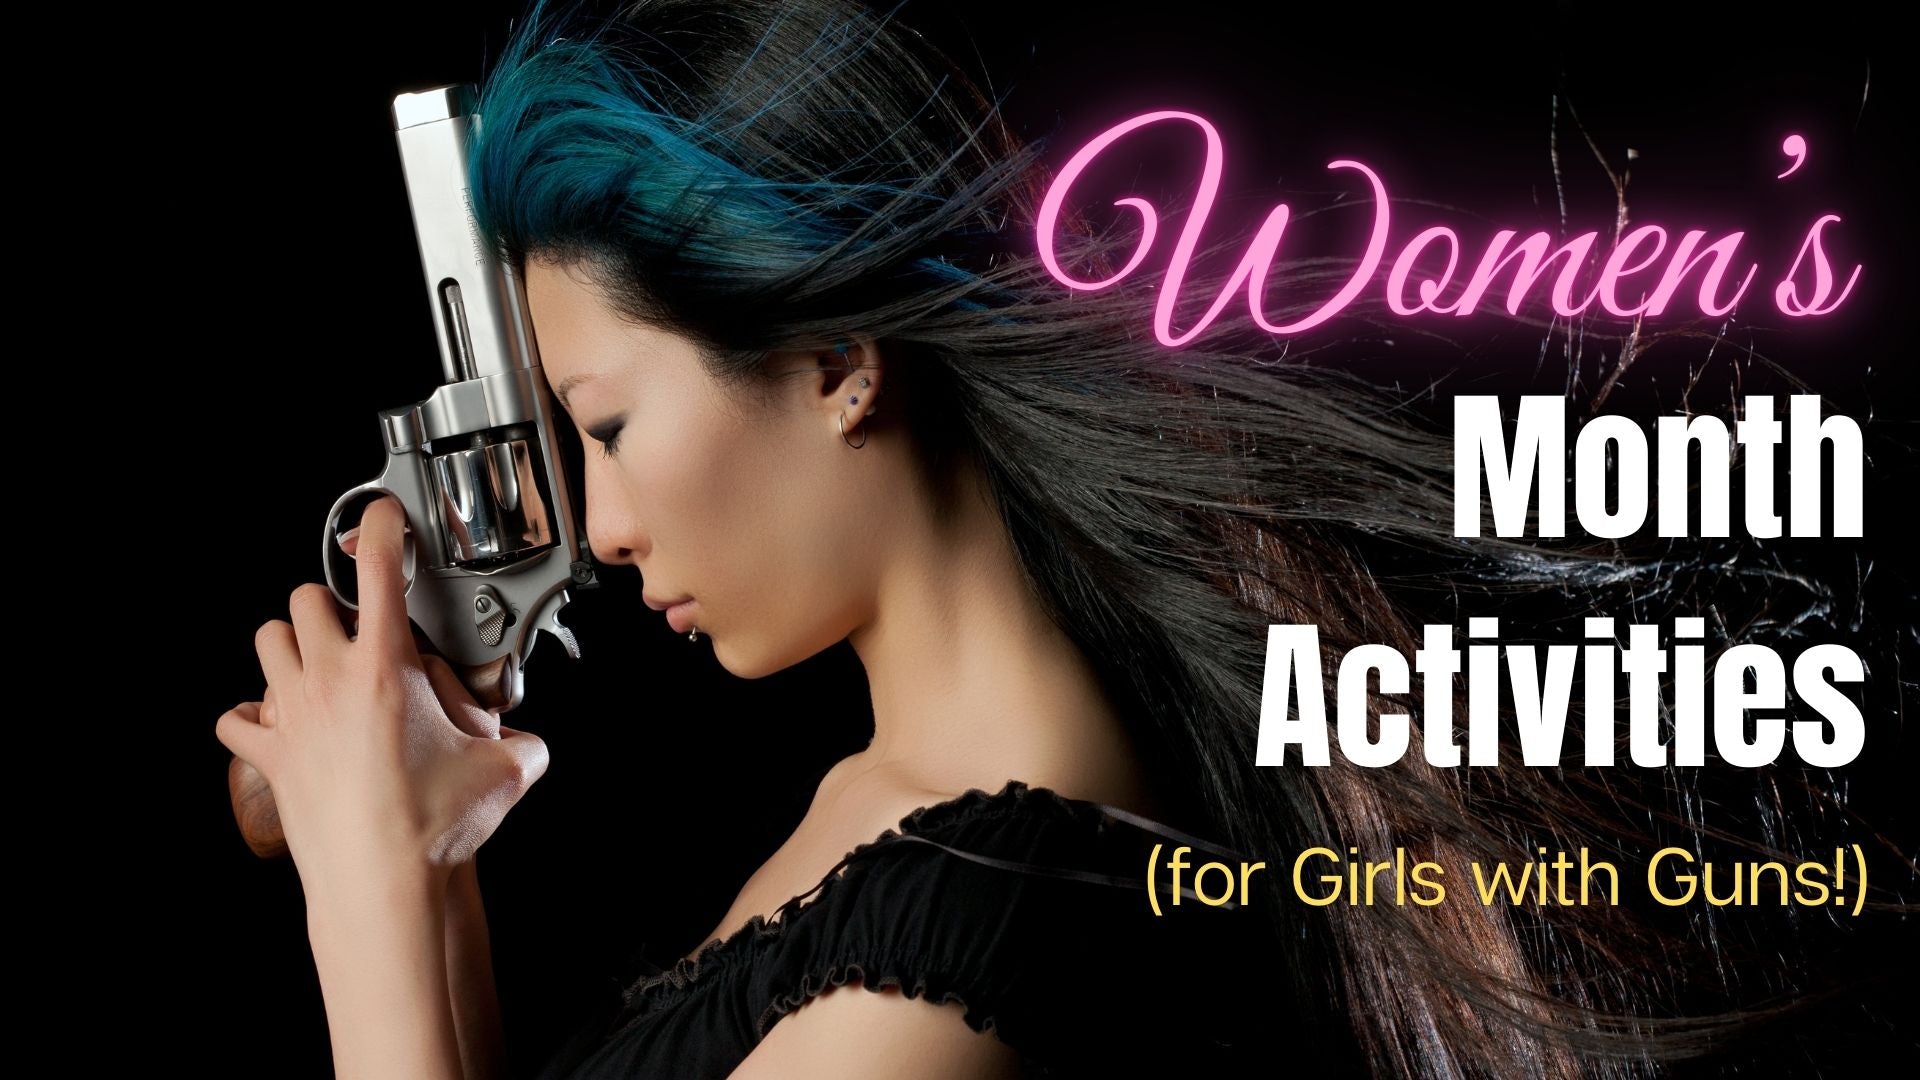 Women’s History Month Activities (for Girls with Guns!)